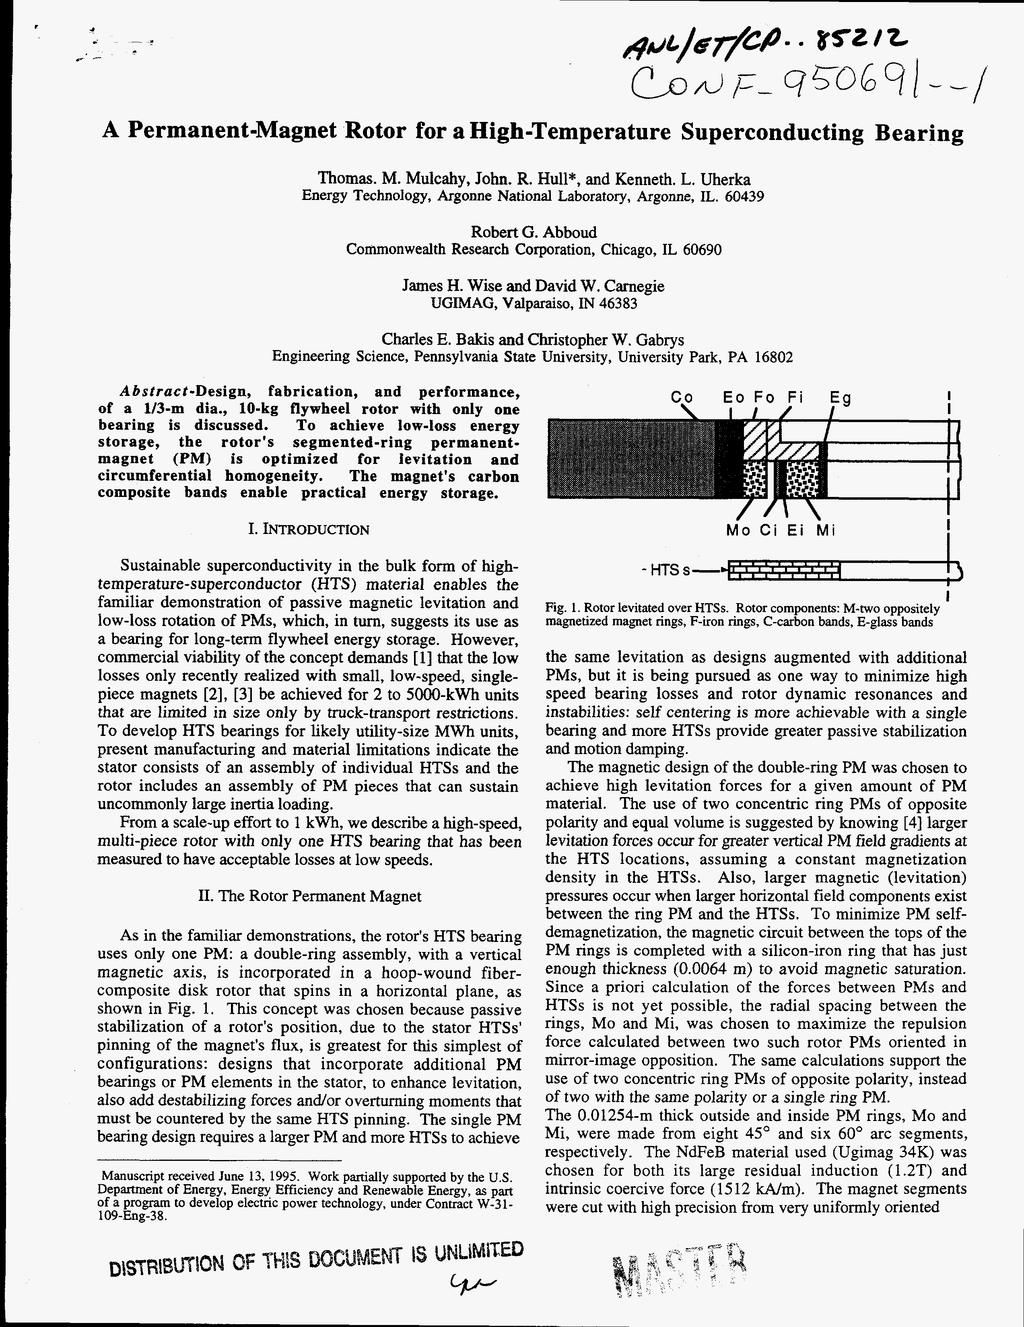 A Permanent-Magnet Rotor for a High-Temperature Superconducting Bearing Thomas.M. Mulcahy, John. R. Hull*, and Kenneth. L. Uherka Energy Technology, Argonne National Laboratory, Argonne, IL.